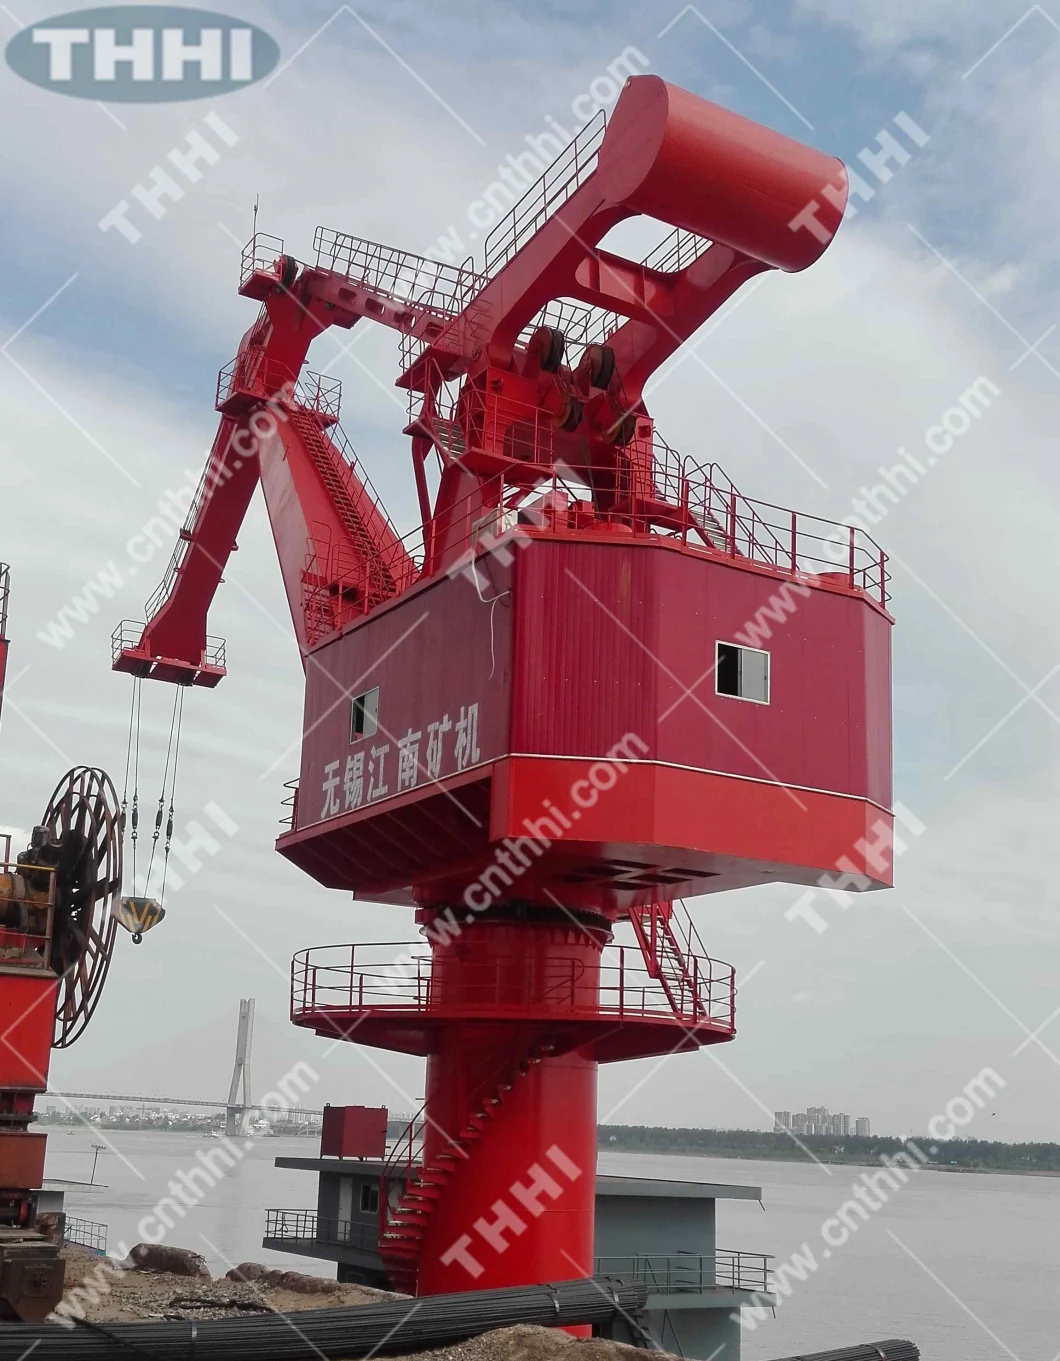 Four Link Level-Luffing Port Fixed Crane